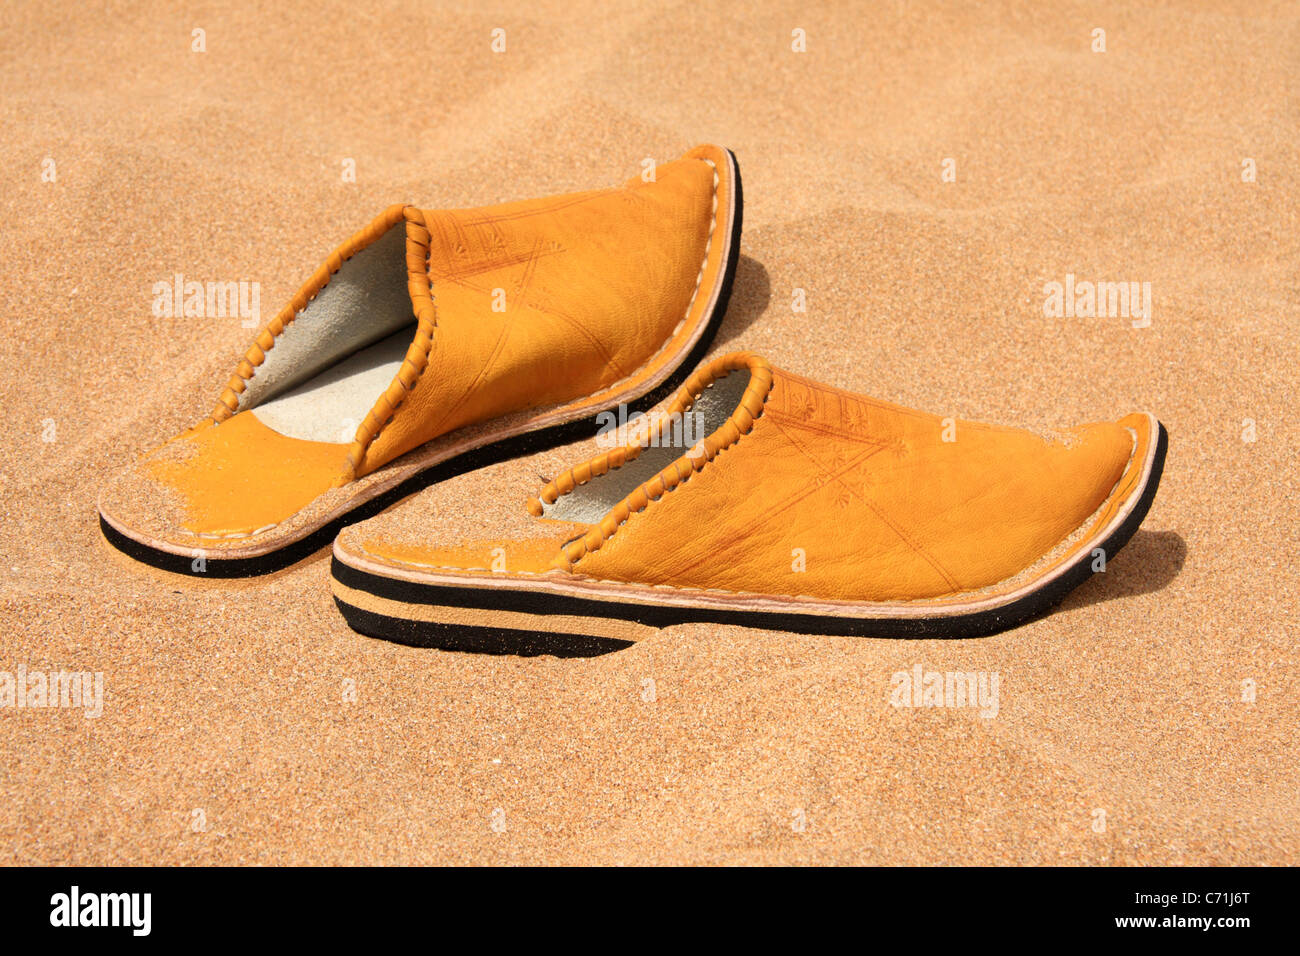 Traditional Moroccan slippers shoes (babouches) on a Moroccan beach. Stock Photo